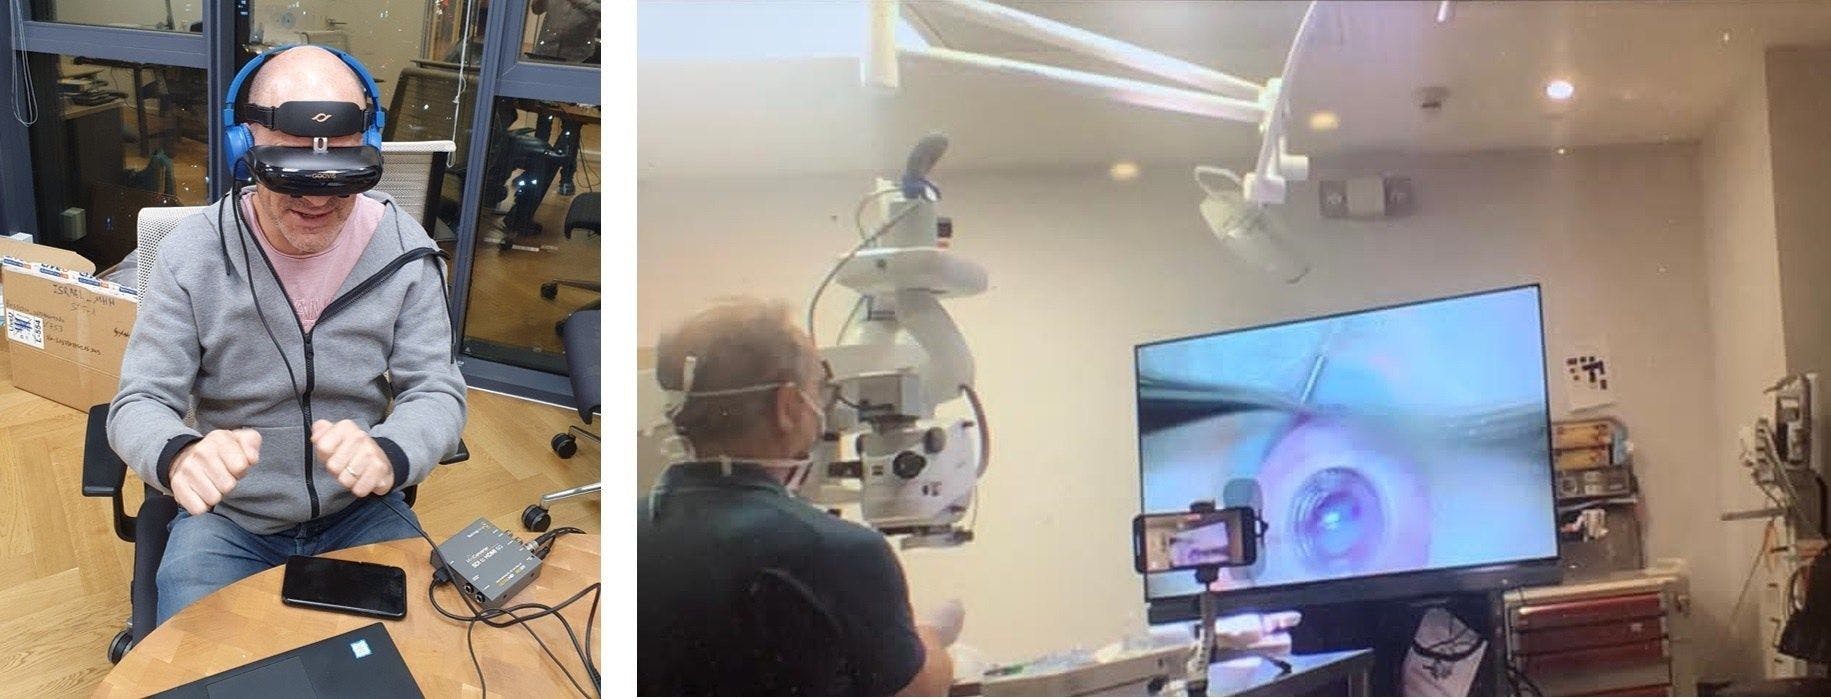 At left, Gilad Litvin, MD, performs the training from Israel, using RSVP. At right, David Rootman, MD, performs the surgery from Canada, using the same technology. (Images courtesy of CorNeat Vision)